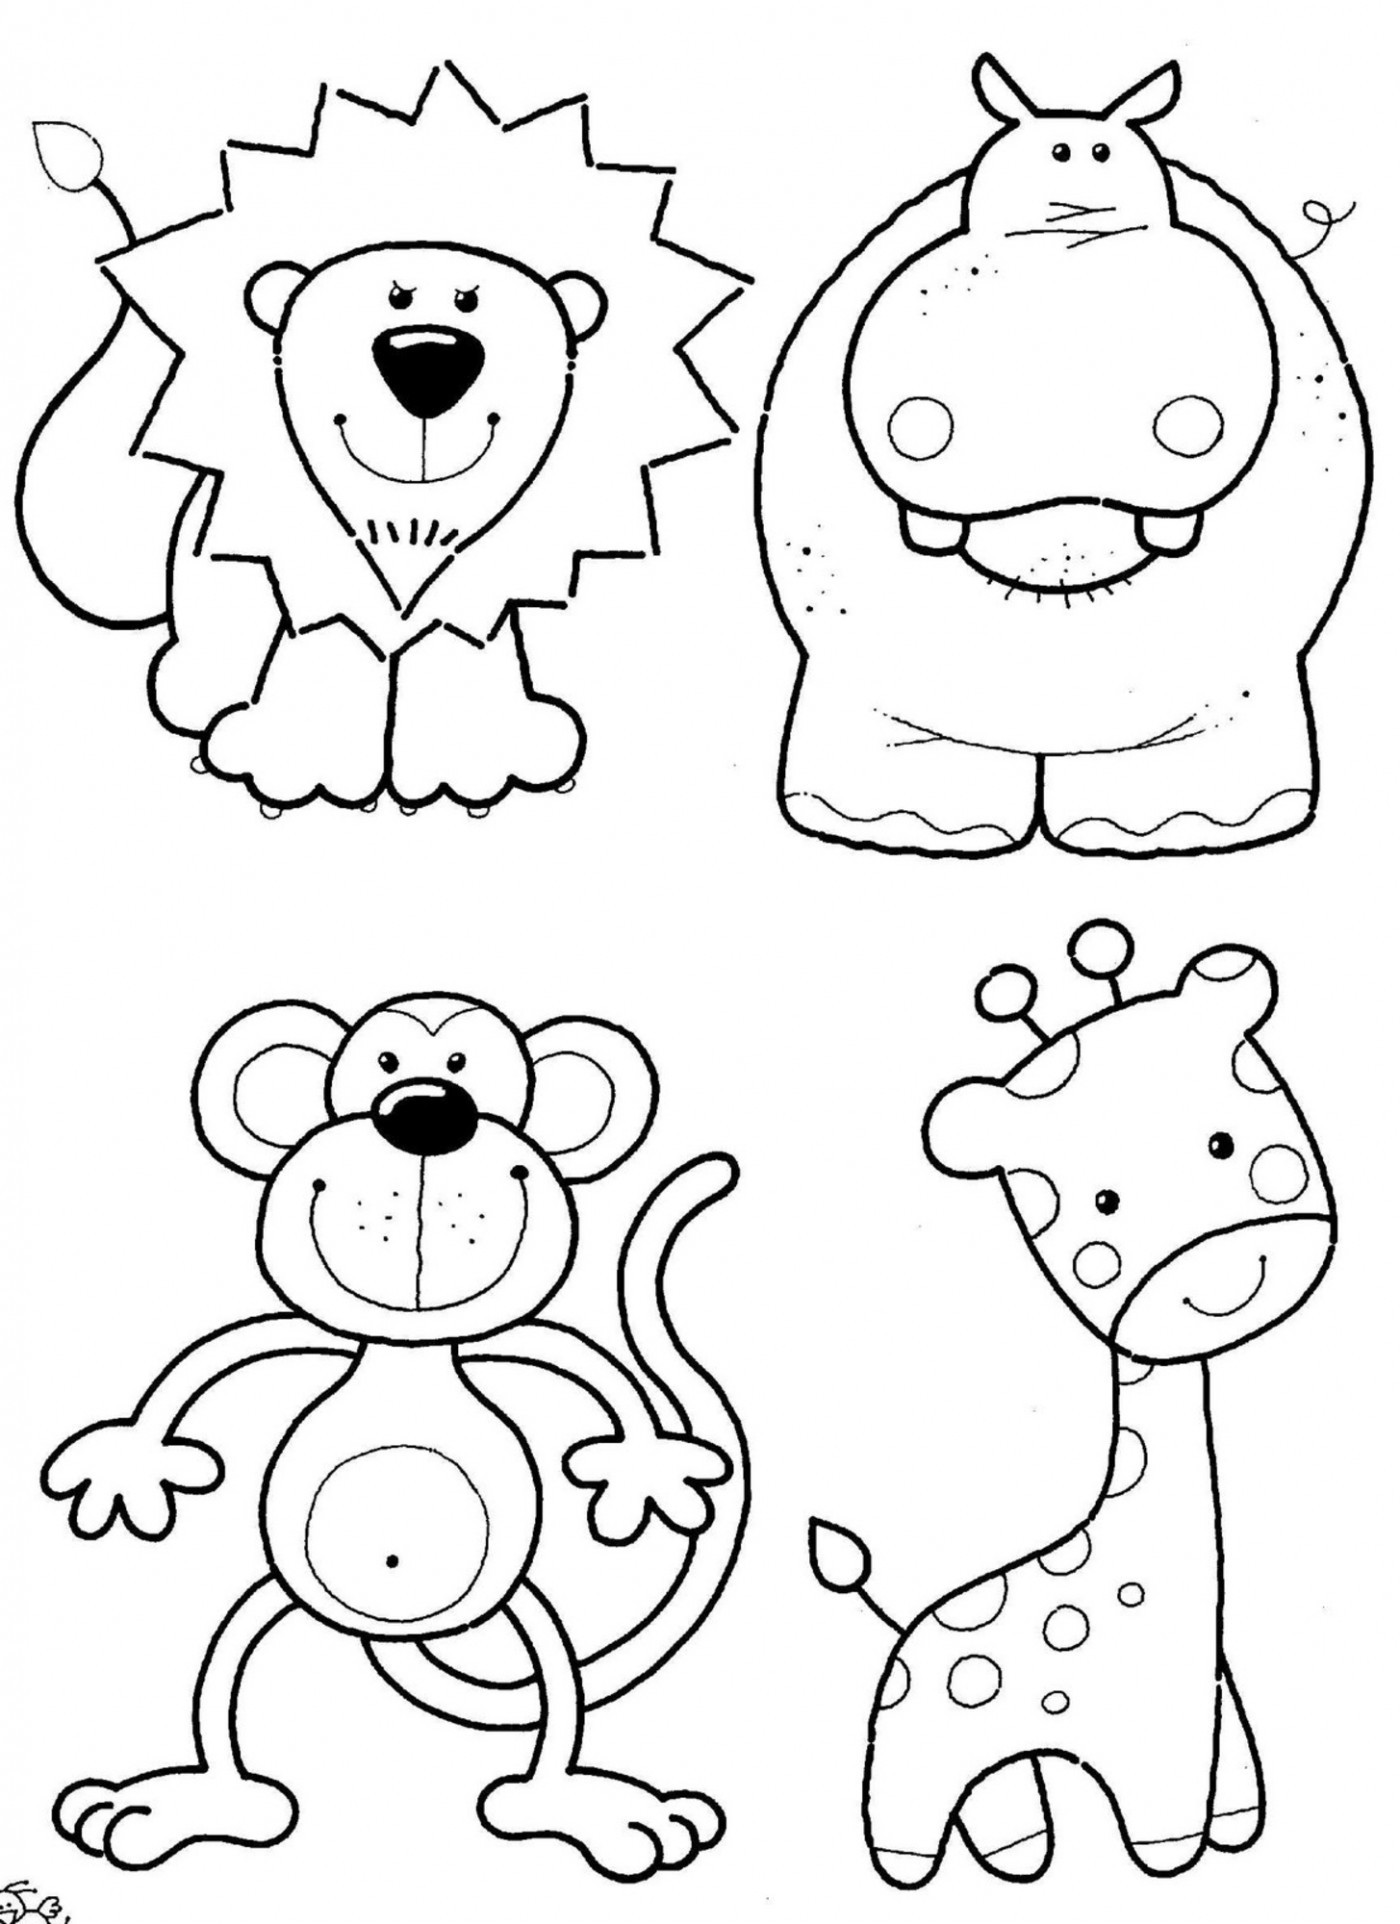 Printable Coloring Pages For Kids Animals
 Animal Coloring Pages 14